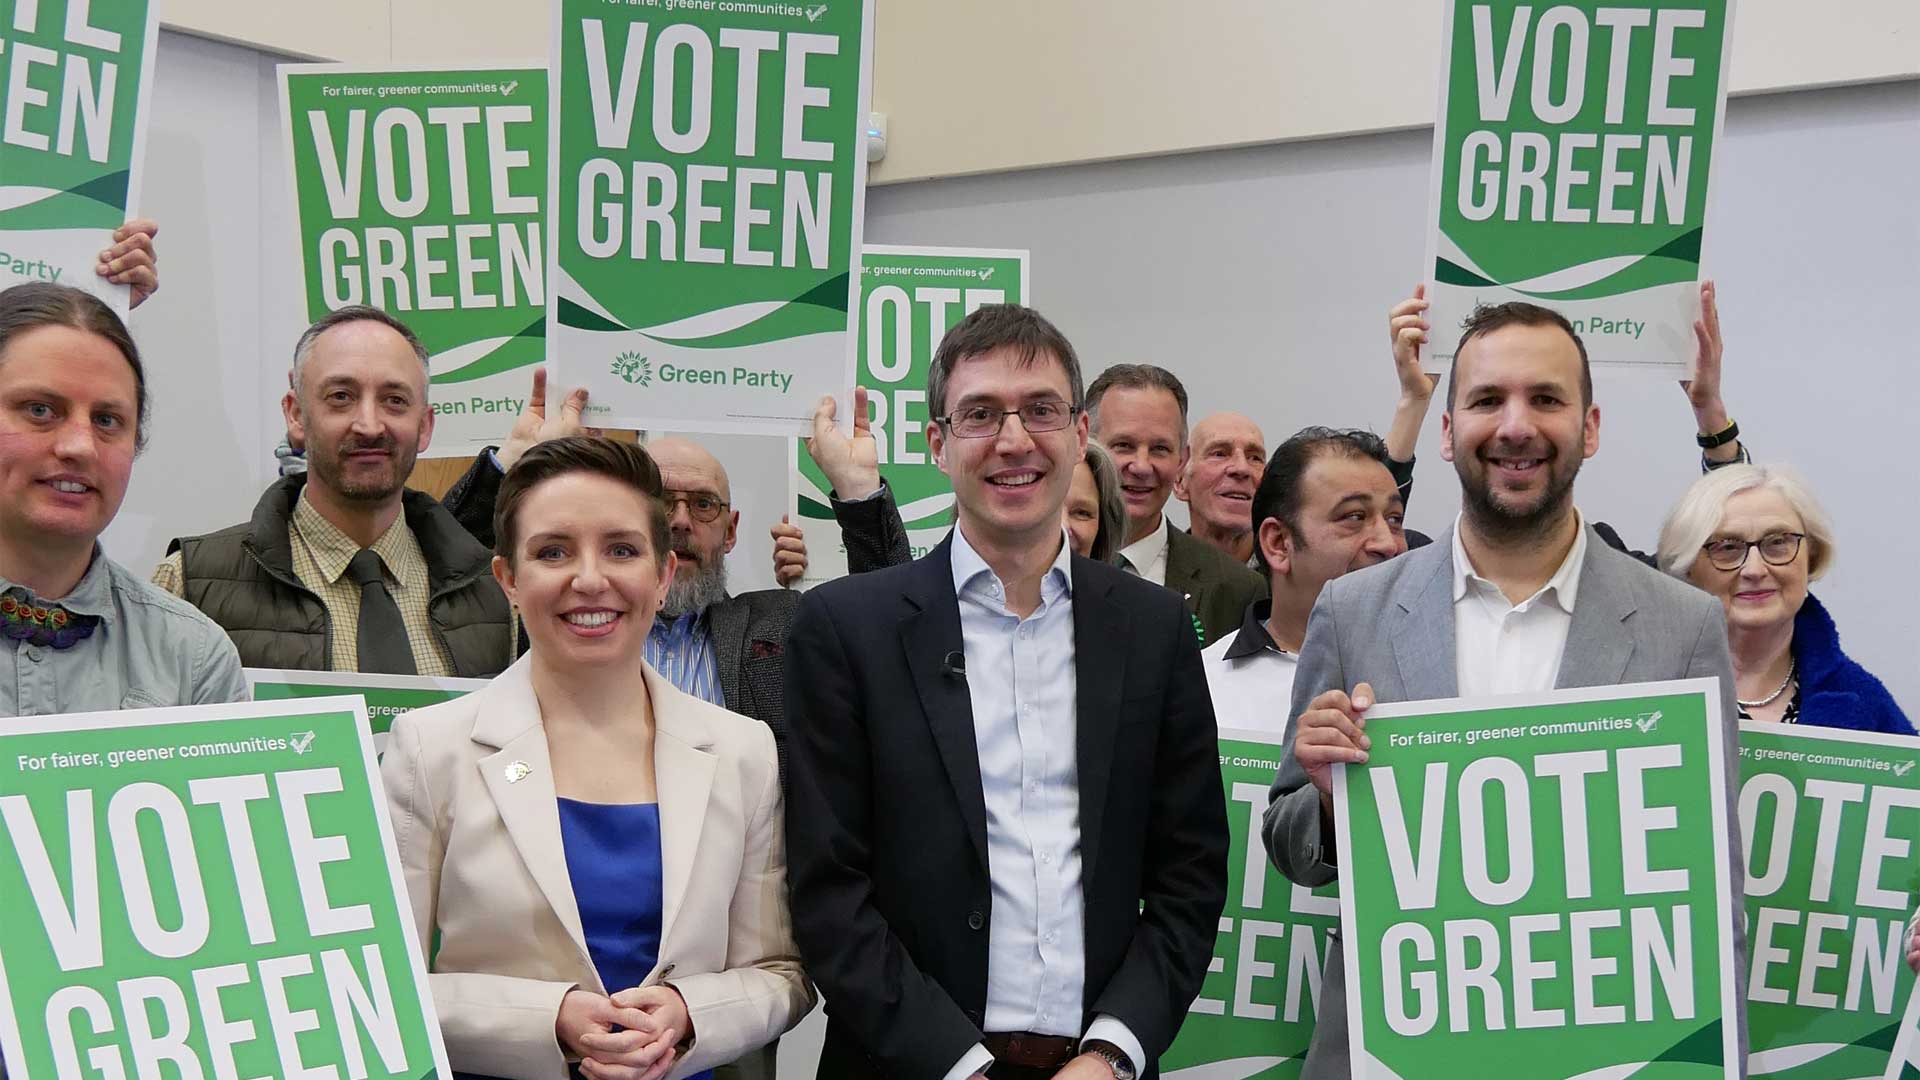 Why Your Green Vote Matters More Than Ever in the Next UK Election - Challenges Facing the Green Party